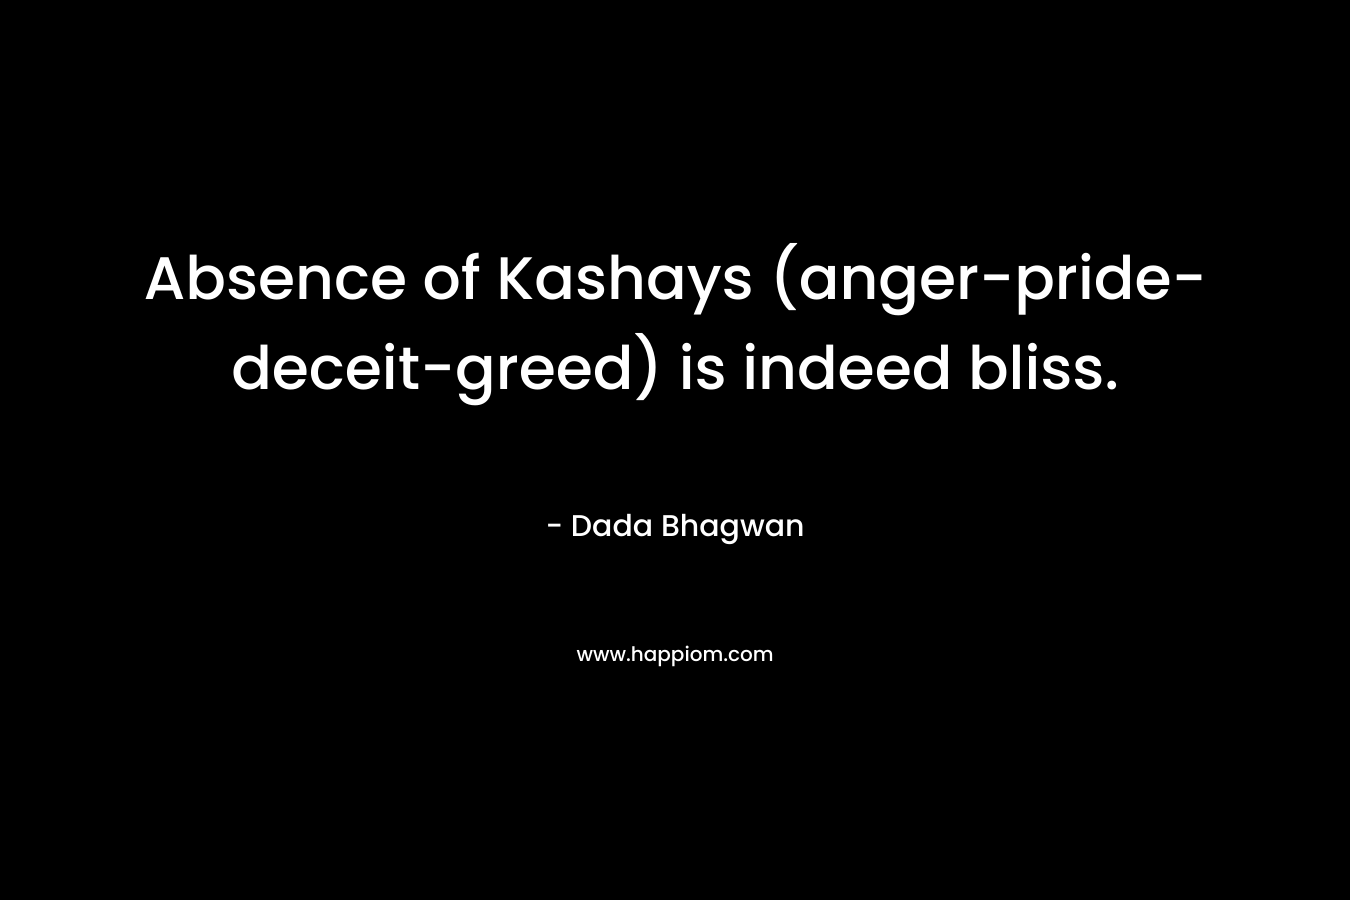 Absence of Kashays (anger-pride-deceit-greed) is indeed bliss.